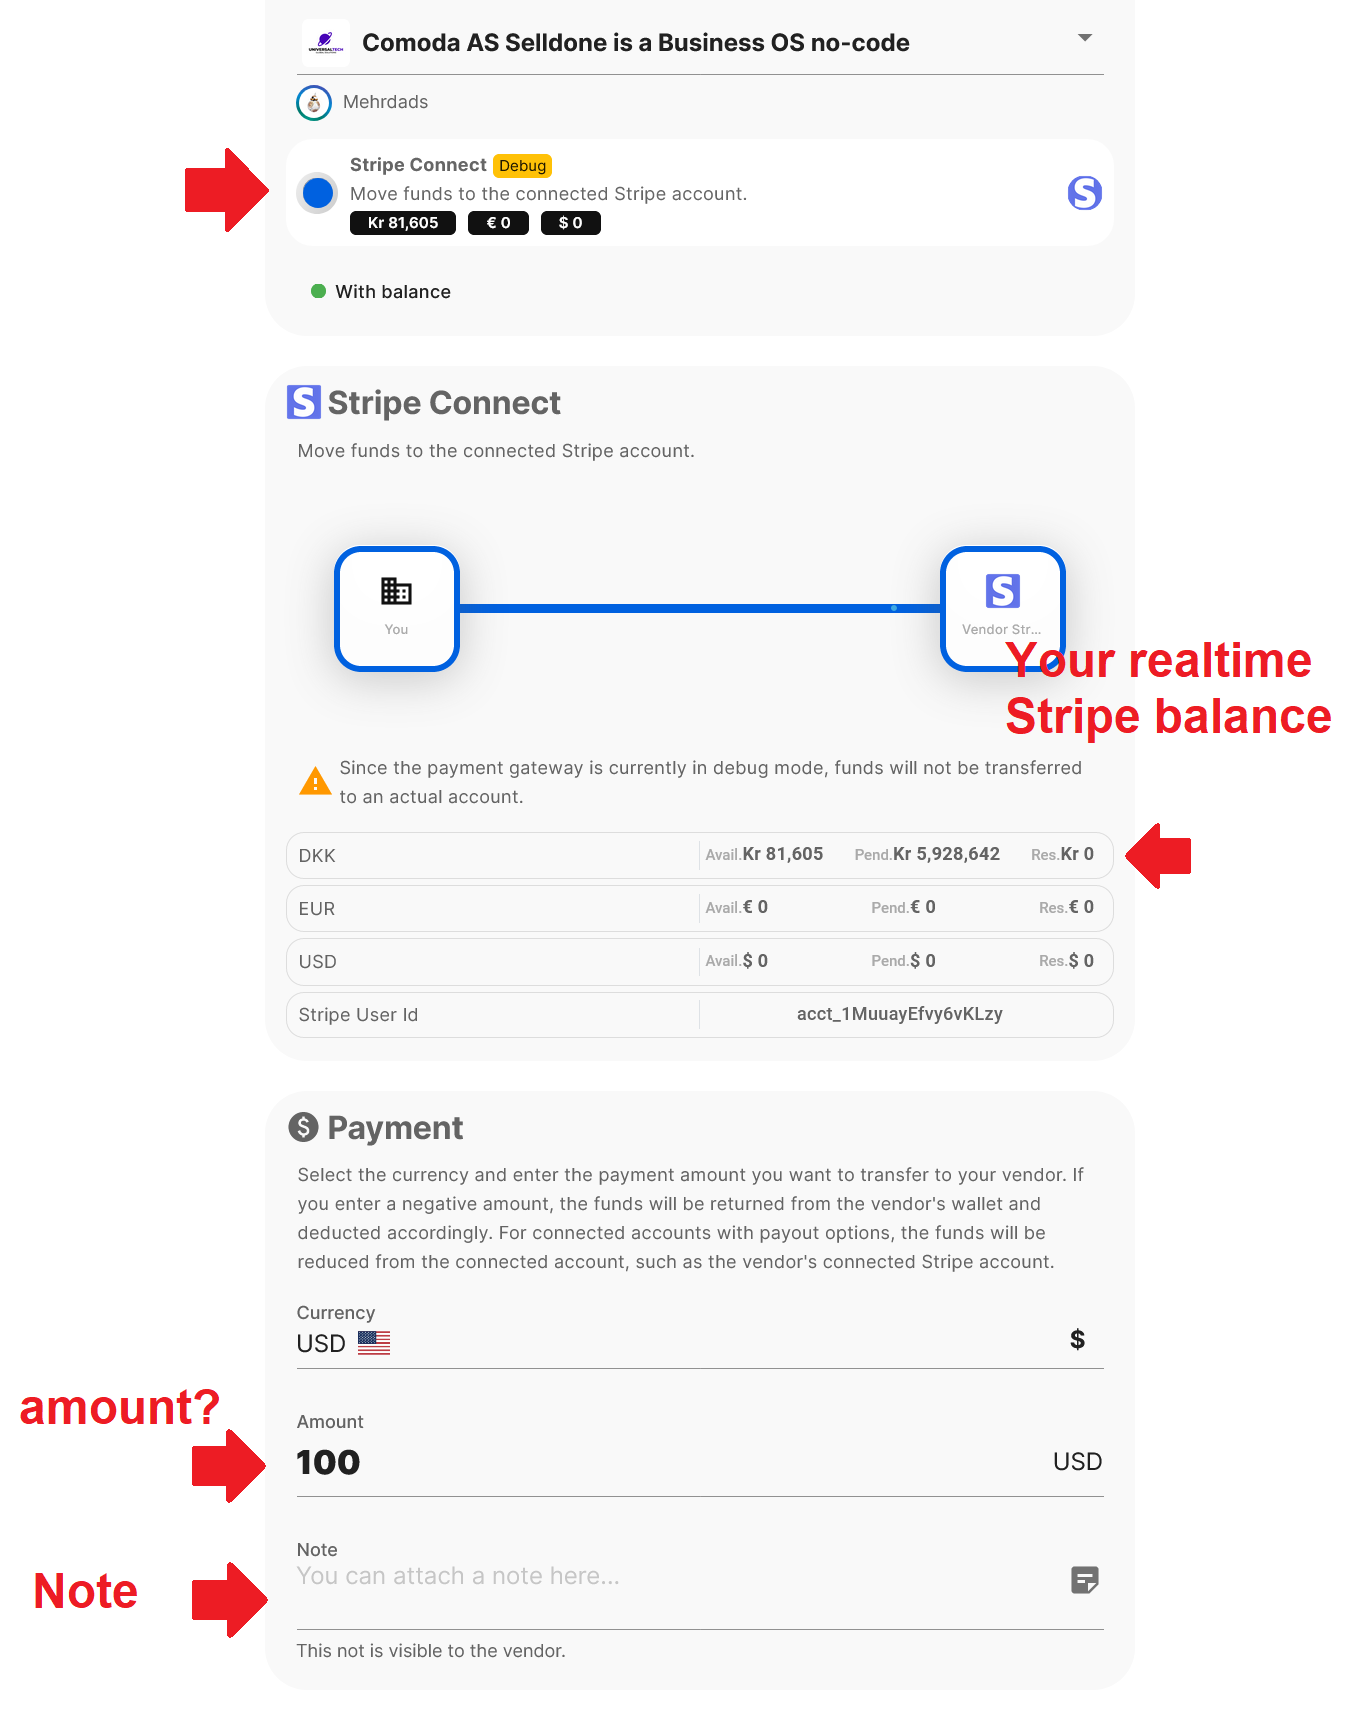 The top image shows that Selldone offers real-time balance updates for your…